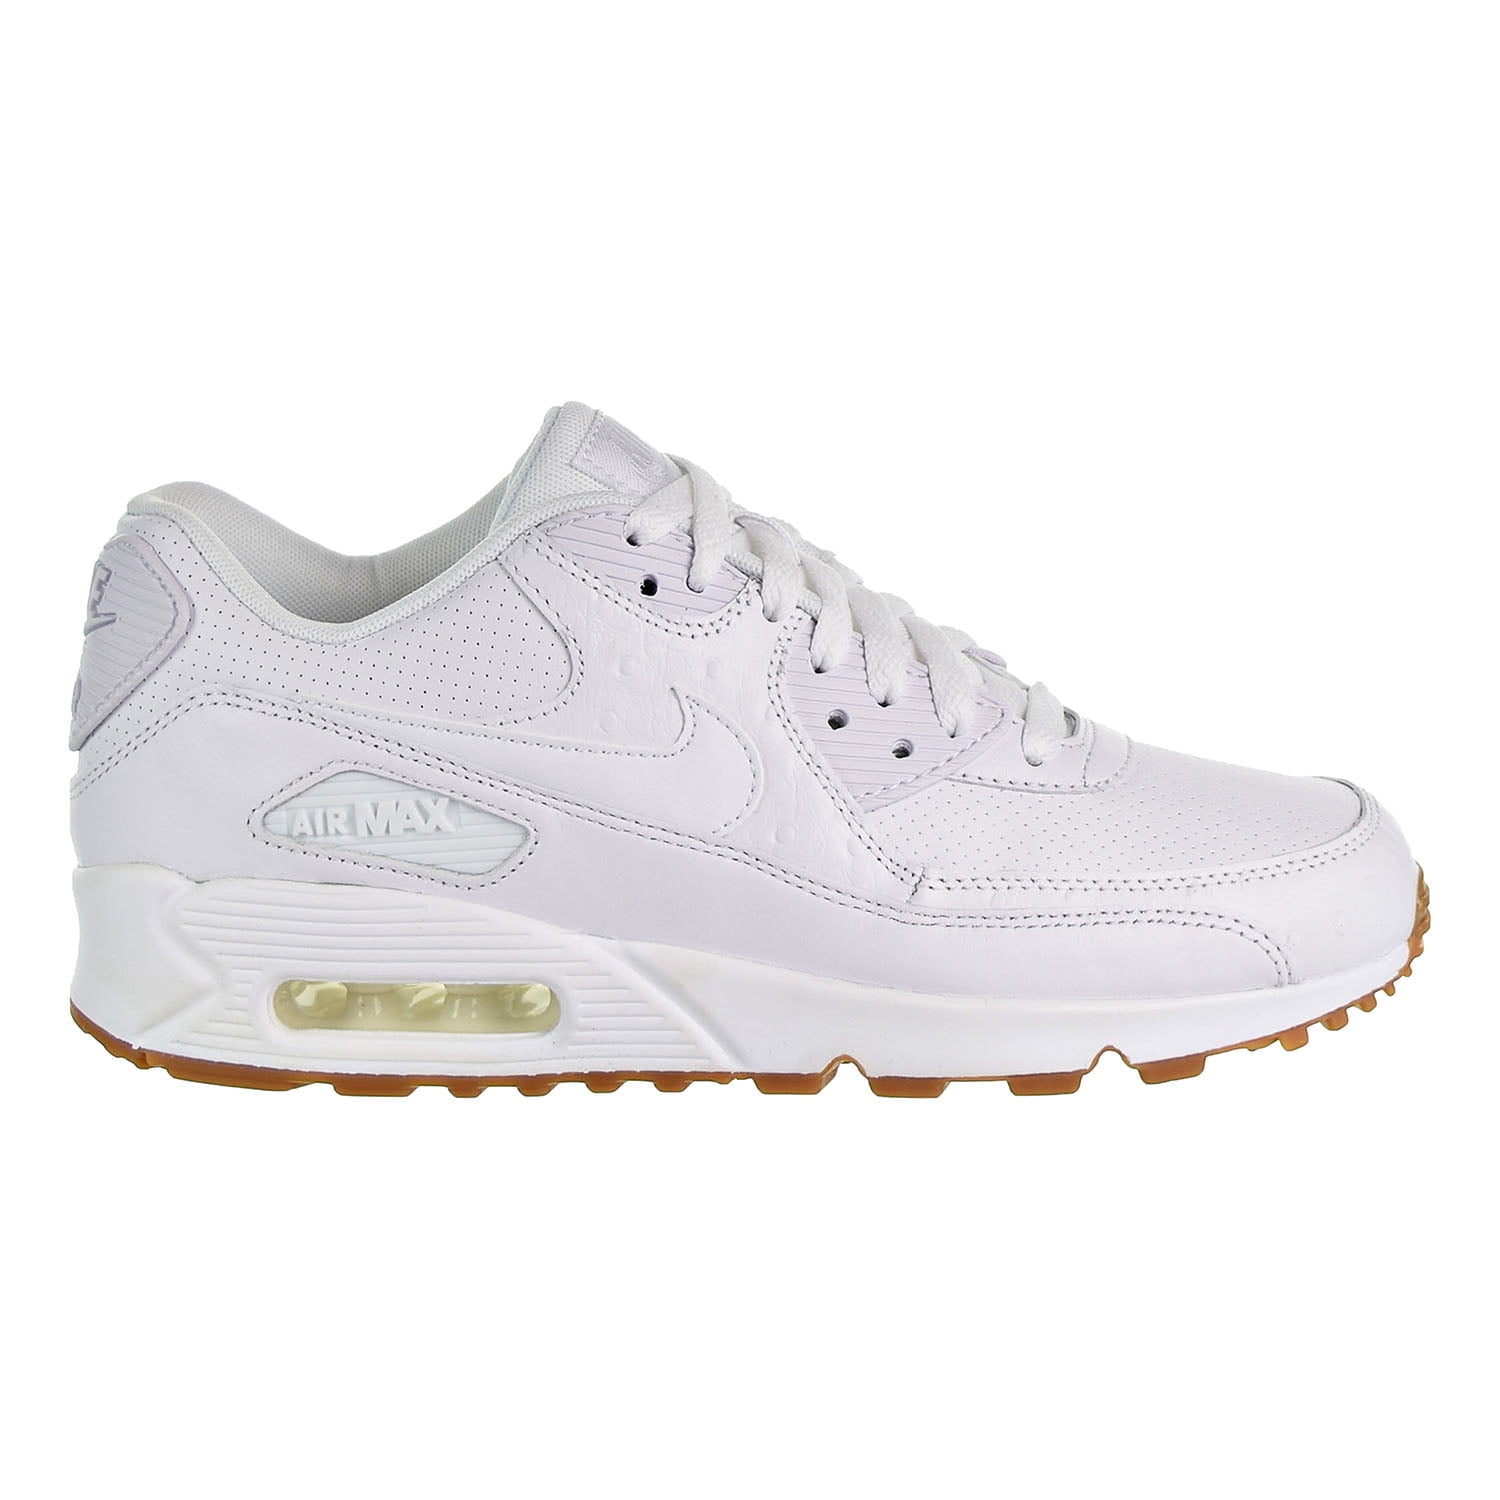 stilte Spectaculair kwaad Nike Air Max 90 Leather PA Men's Shoes White/White/Gum Light Brown  705012-111 - Walmart.com